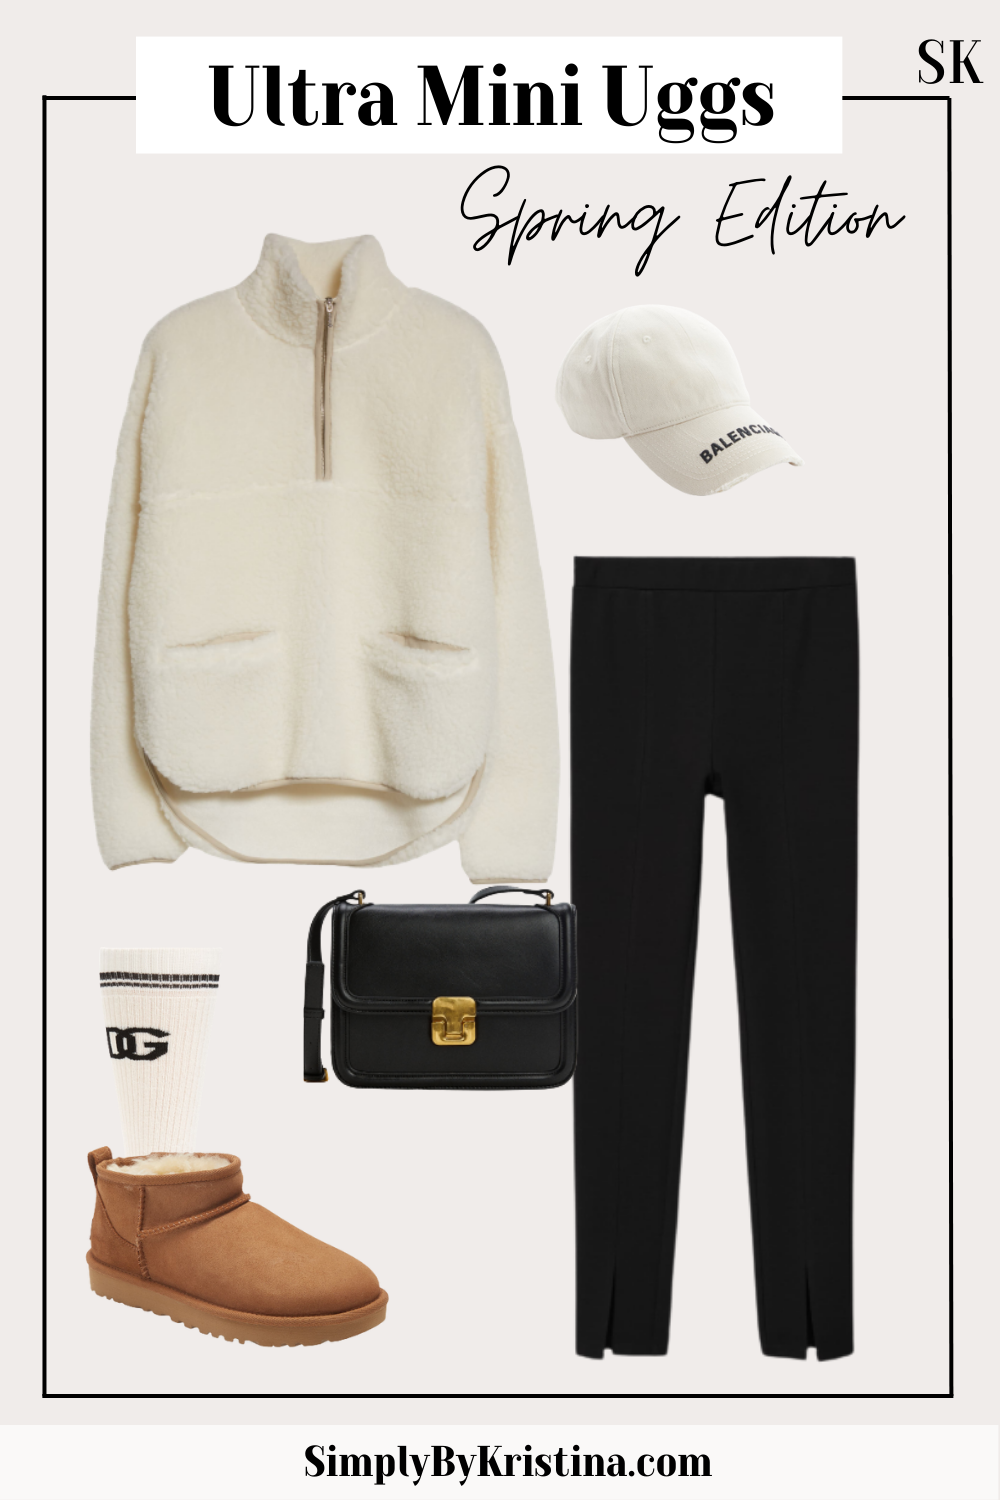 What To Wear With Ultra Mini Ugg Boots - Spring Edition - SimplyByKristina